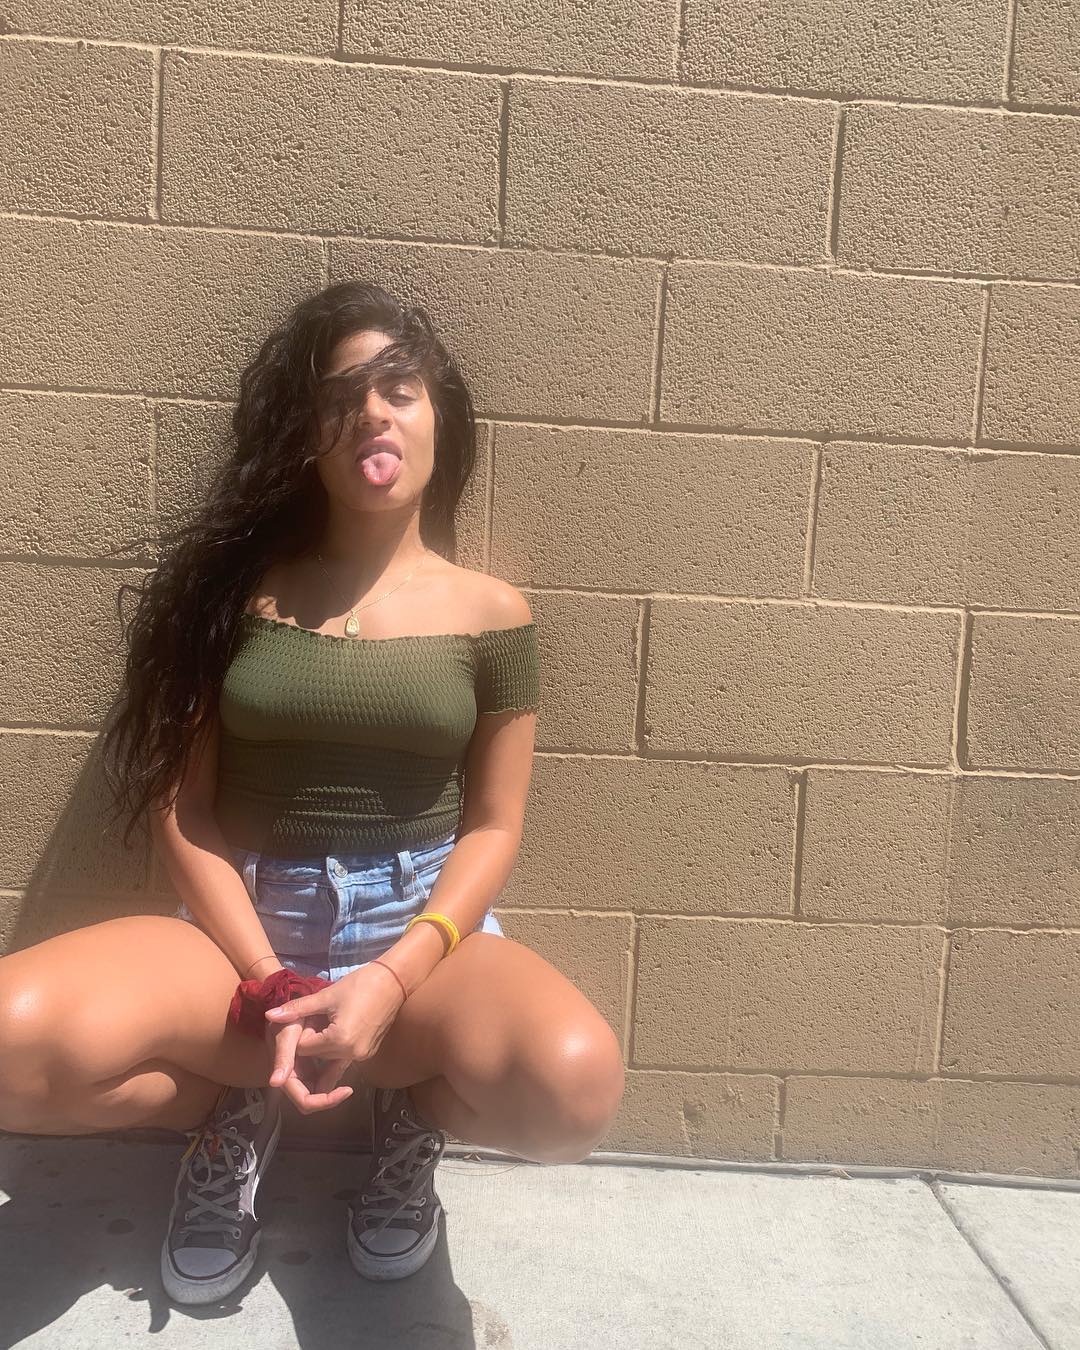 51 Hot Pictures Of Jessie Reyez Will Leave You Flabbergasted By Her Hot Magnificence 543